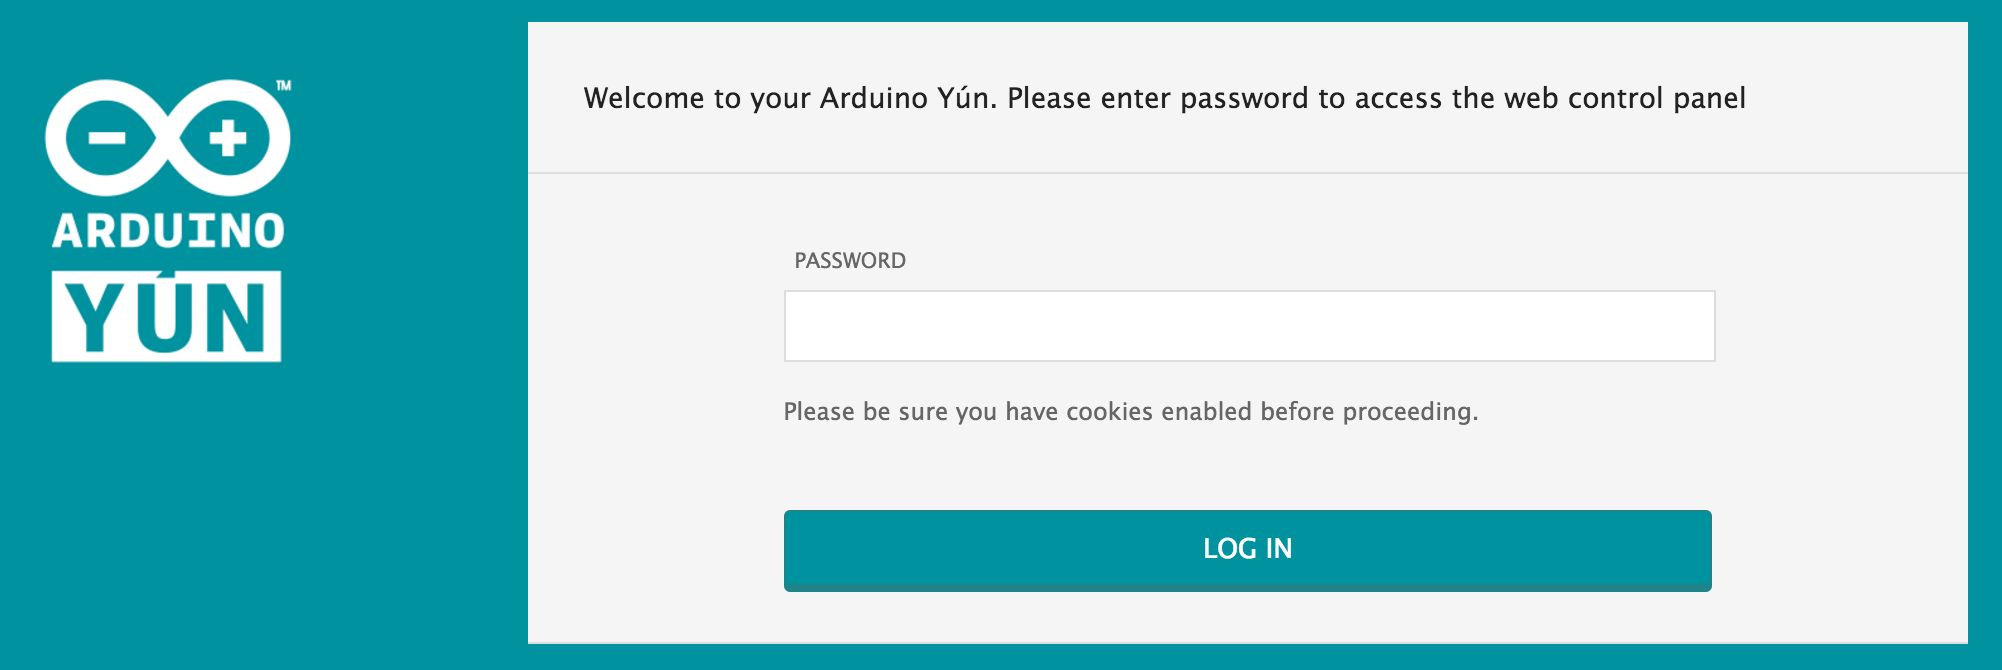 By default the password is arduino You will then be redirected to the main - photo 5